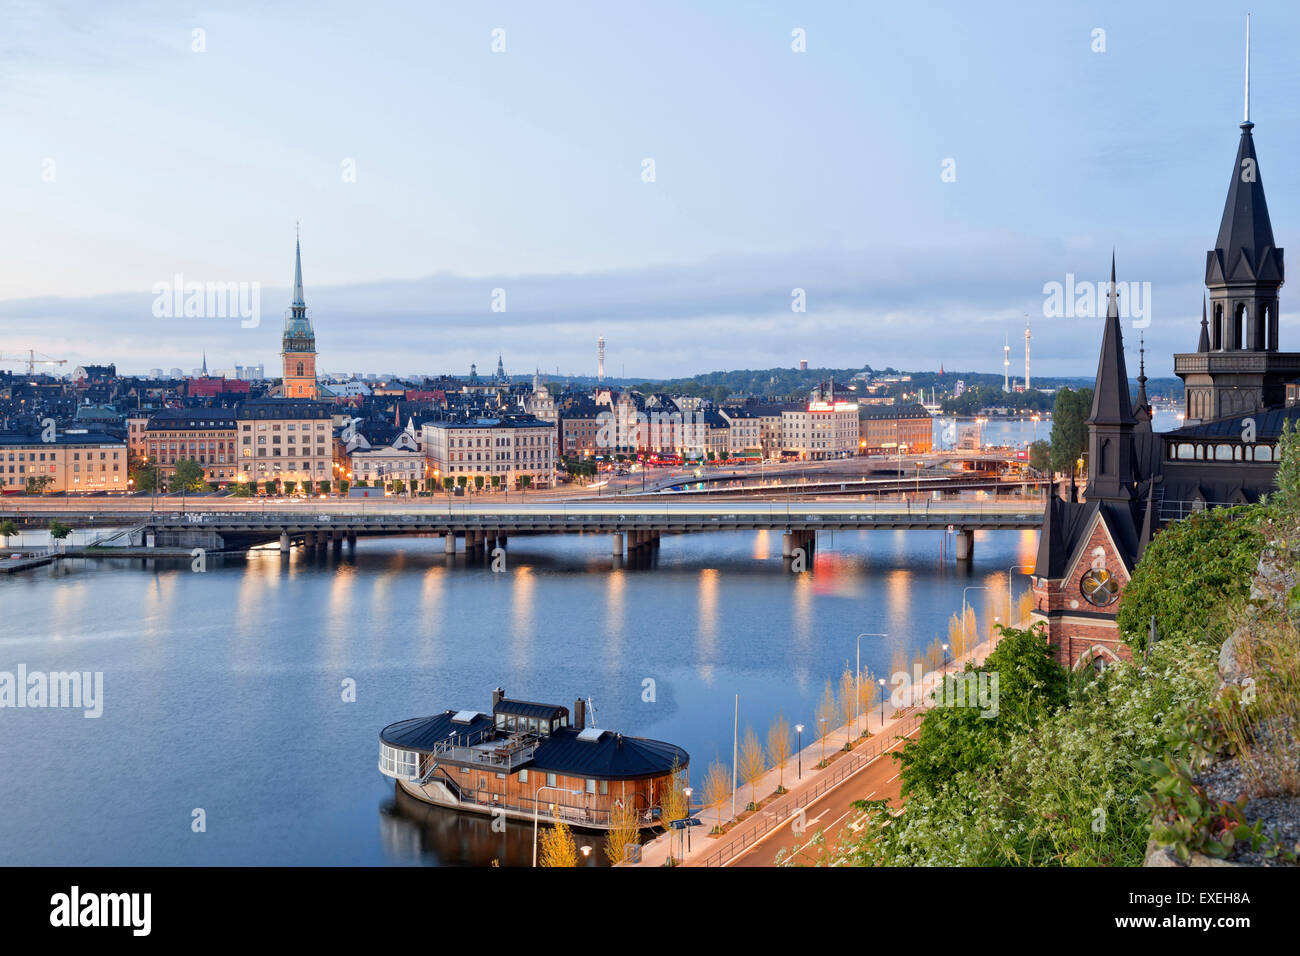 View of the historic centre, Gamla Stan, Stockholm, Sweden Stock Photo